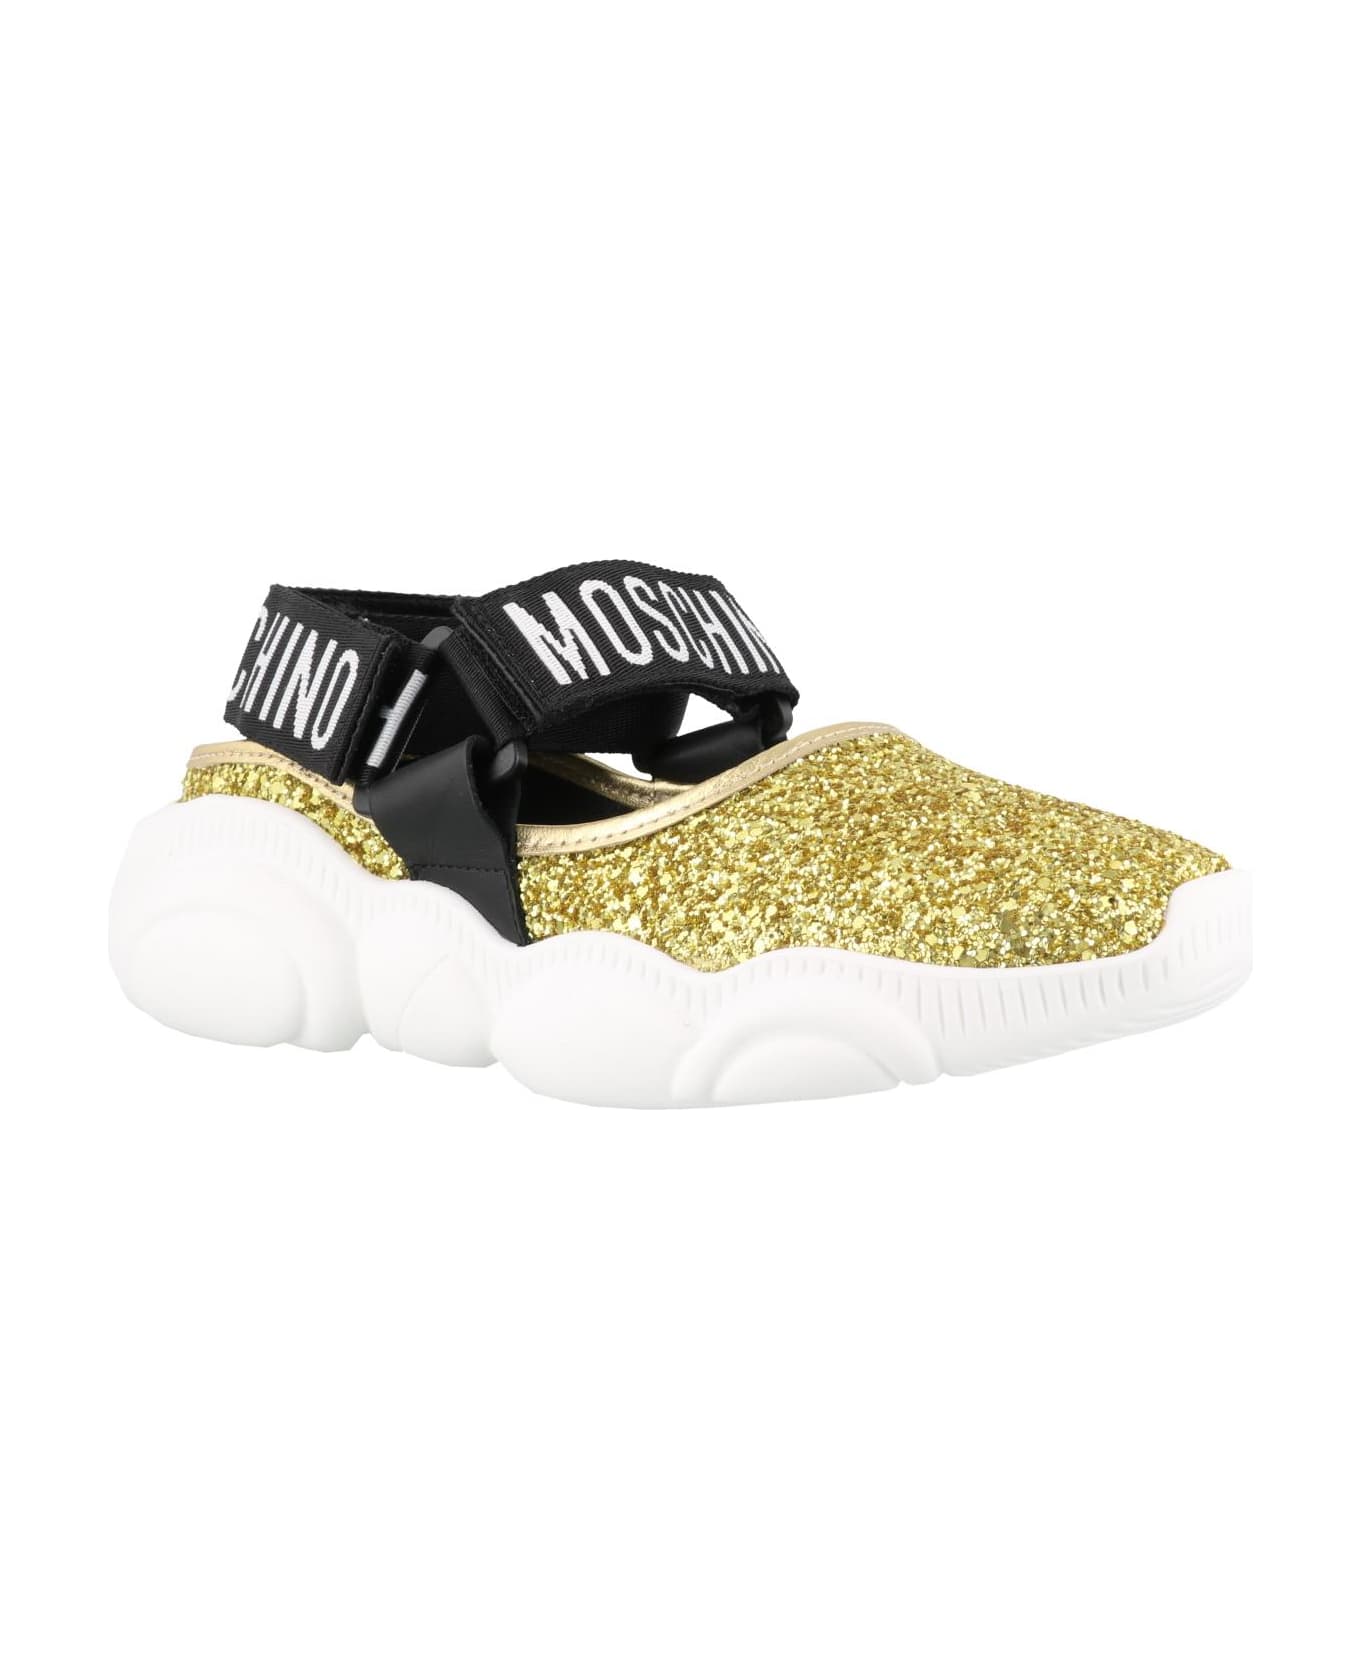 Moschino Teddy Shoes | italist